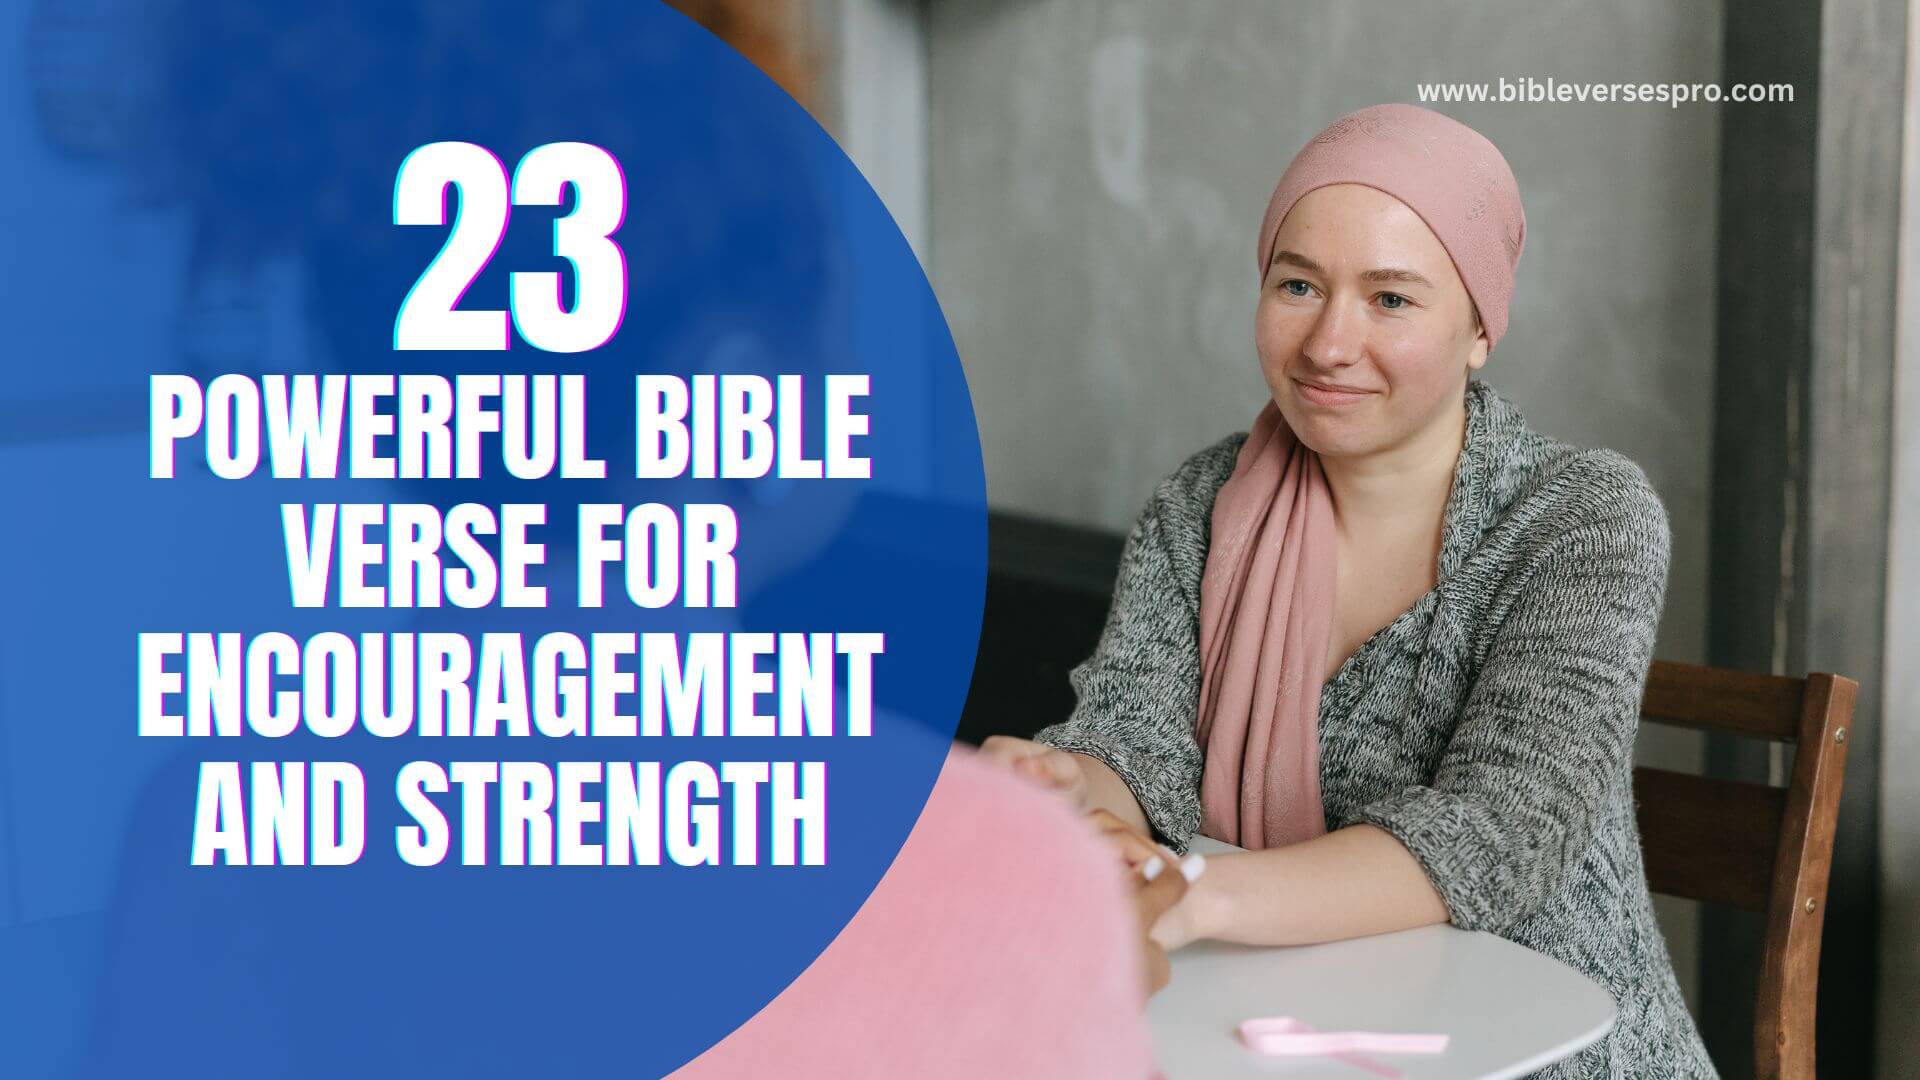 POWERFUL BIBLE VERSE FOR ENCOURAGEMENT AND STRENGTH